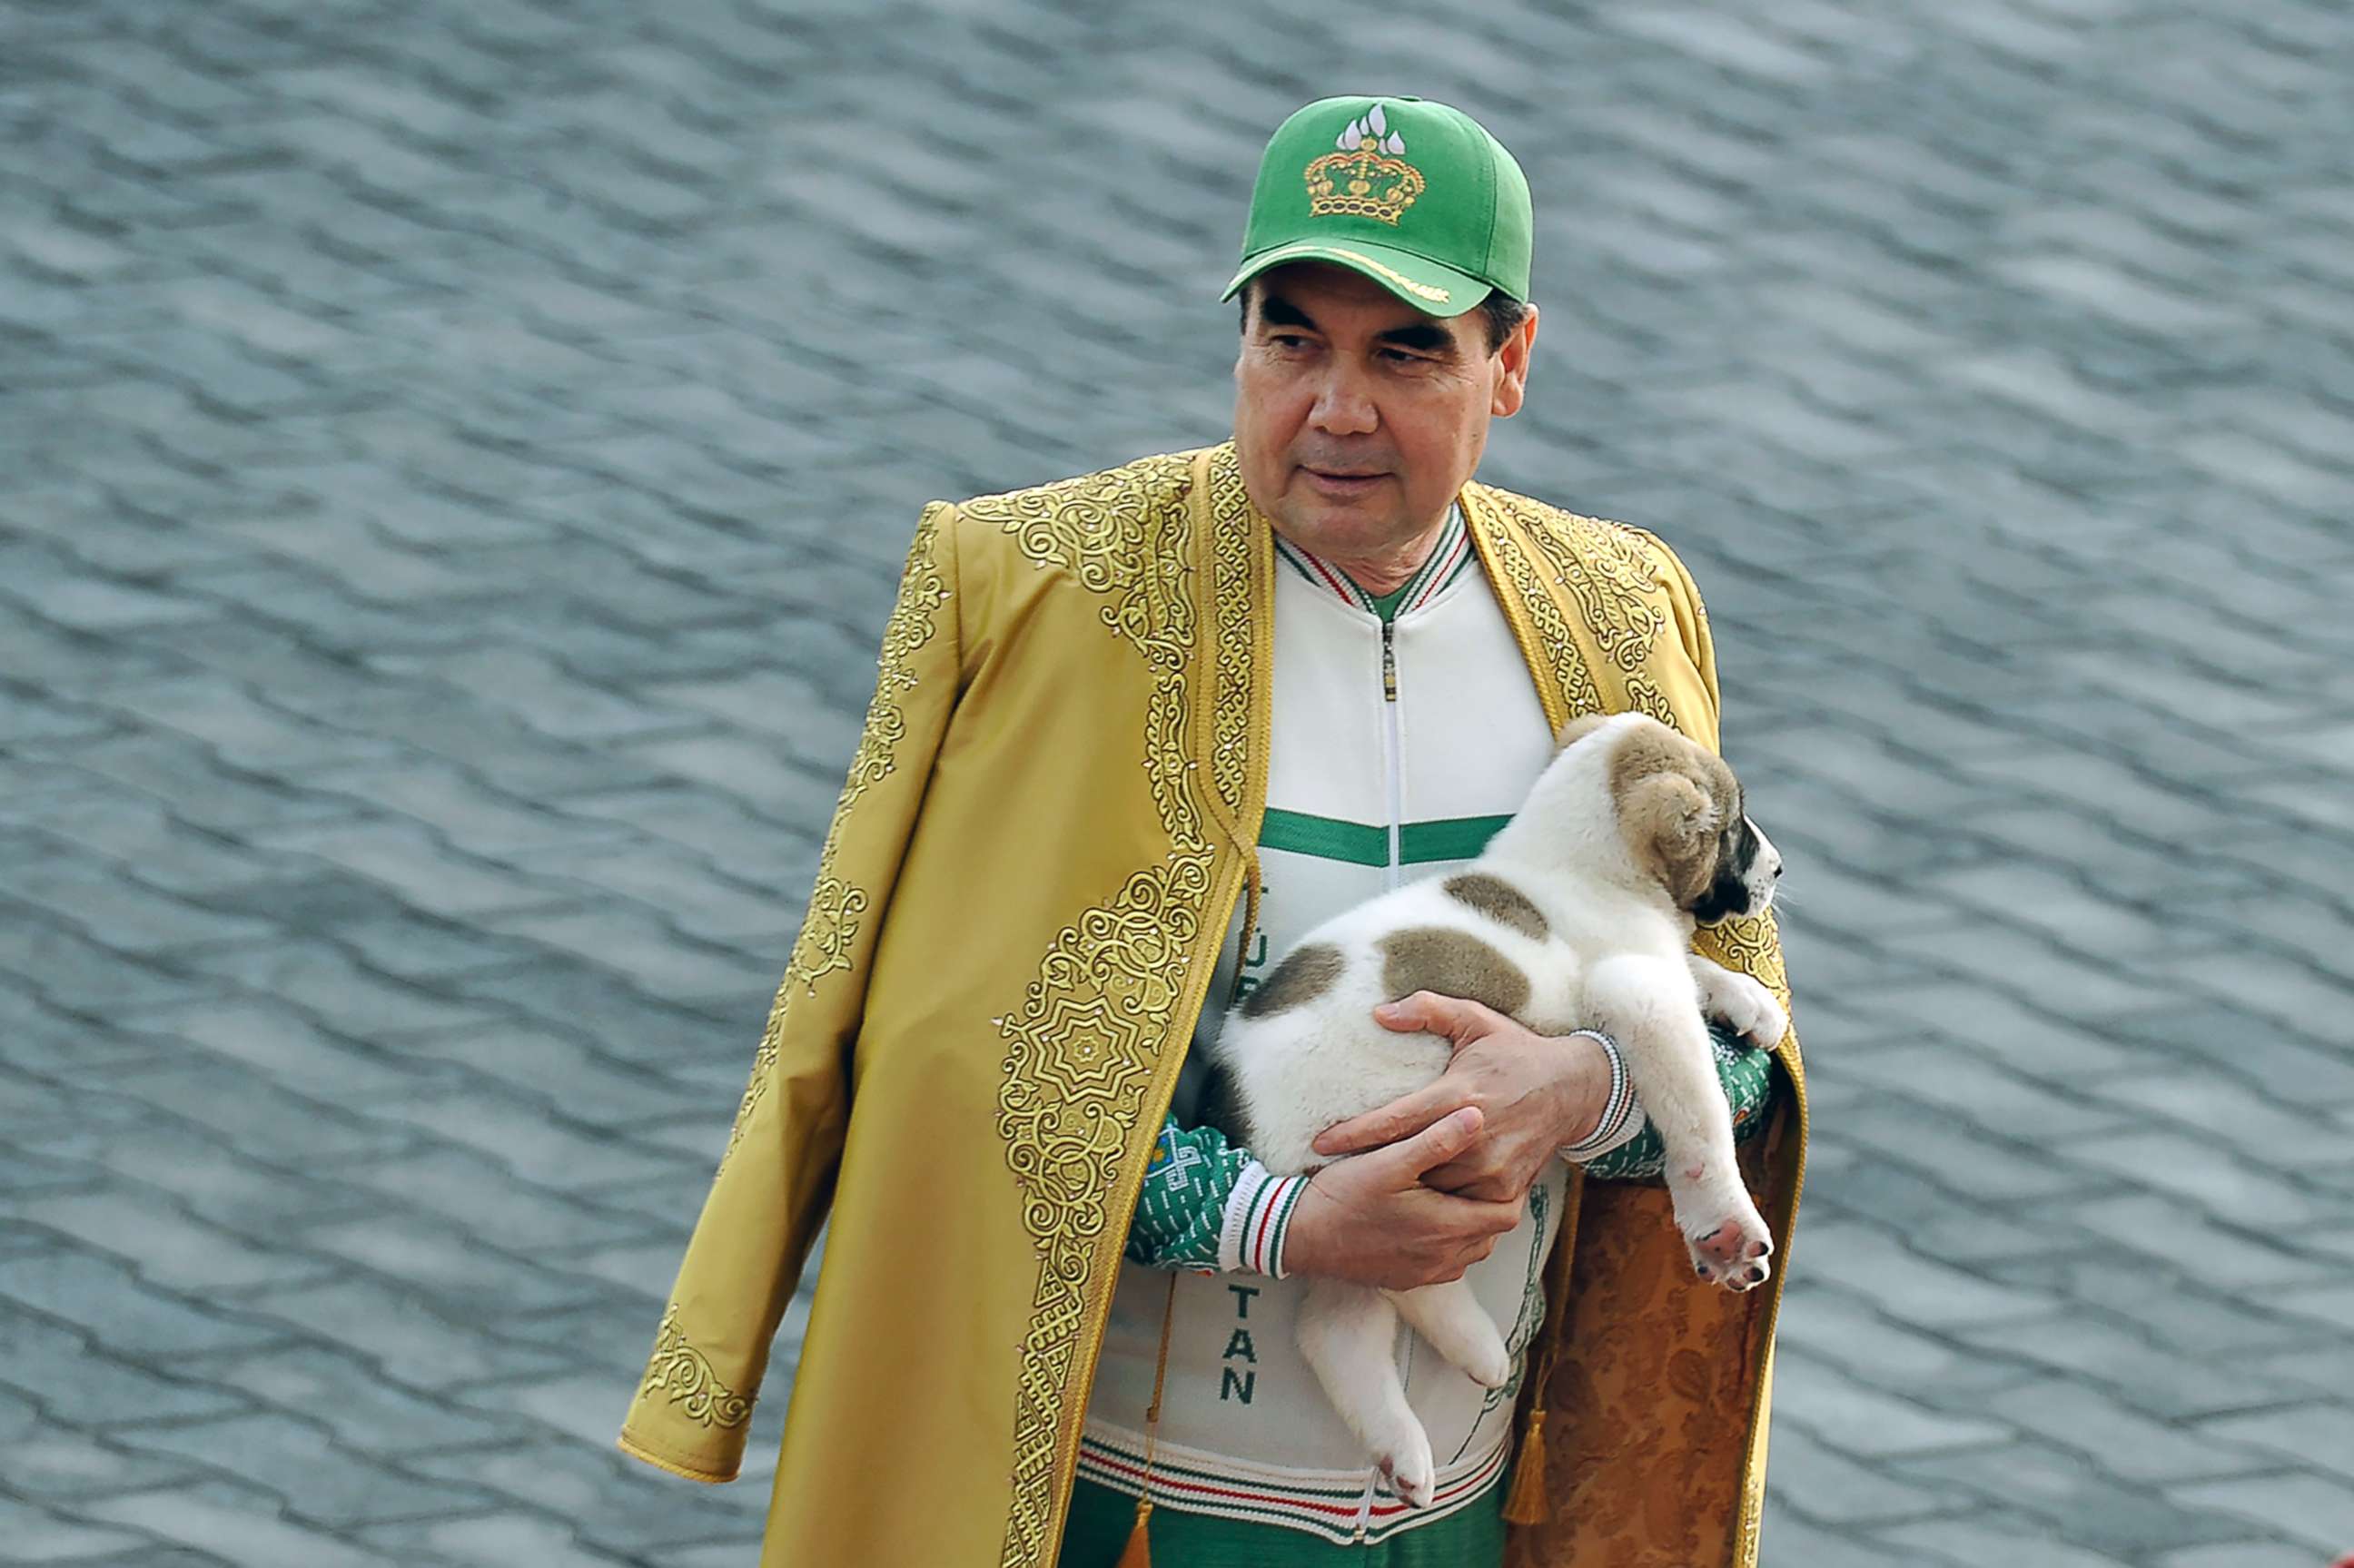 PHOTO: Turkmenistan's President Gurbanguly Berdymukhamedov holds a Turkmen shepherd dog, locally known as Alabai, as he takes part in celebrations for the Day of the Horse in Ashgabat, April 28, 2018.